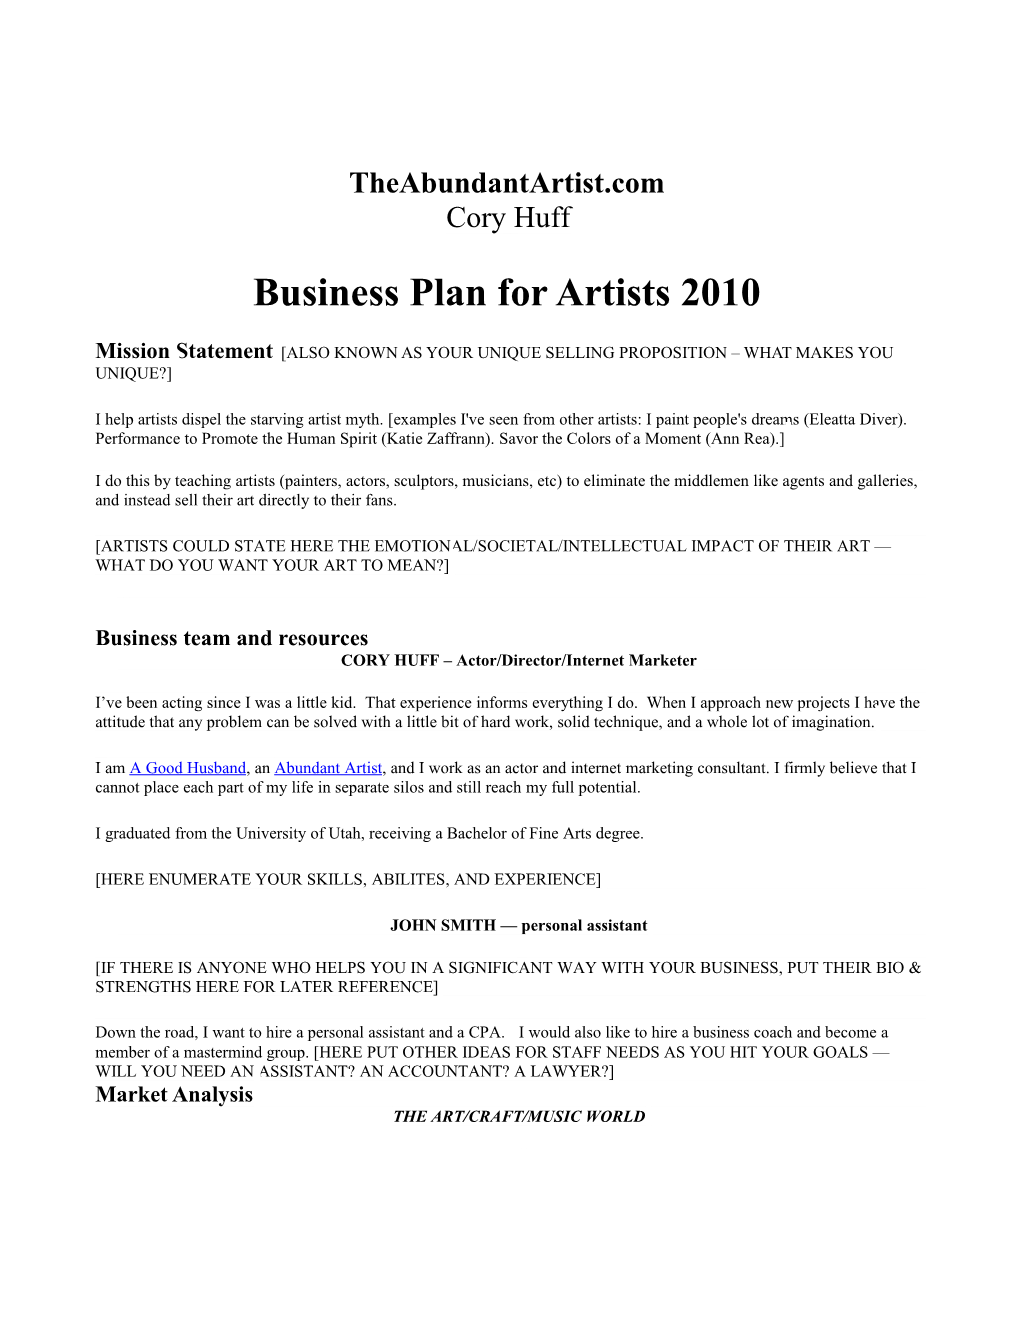 Business Plans for Artists